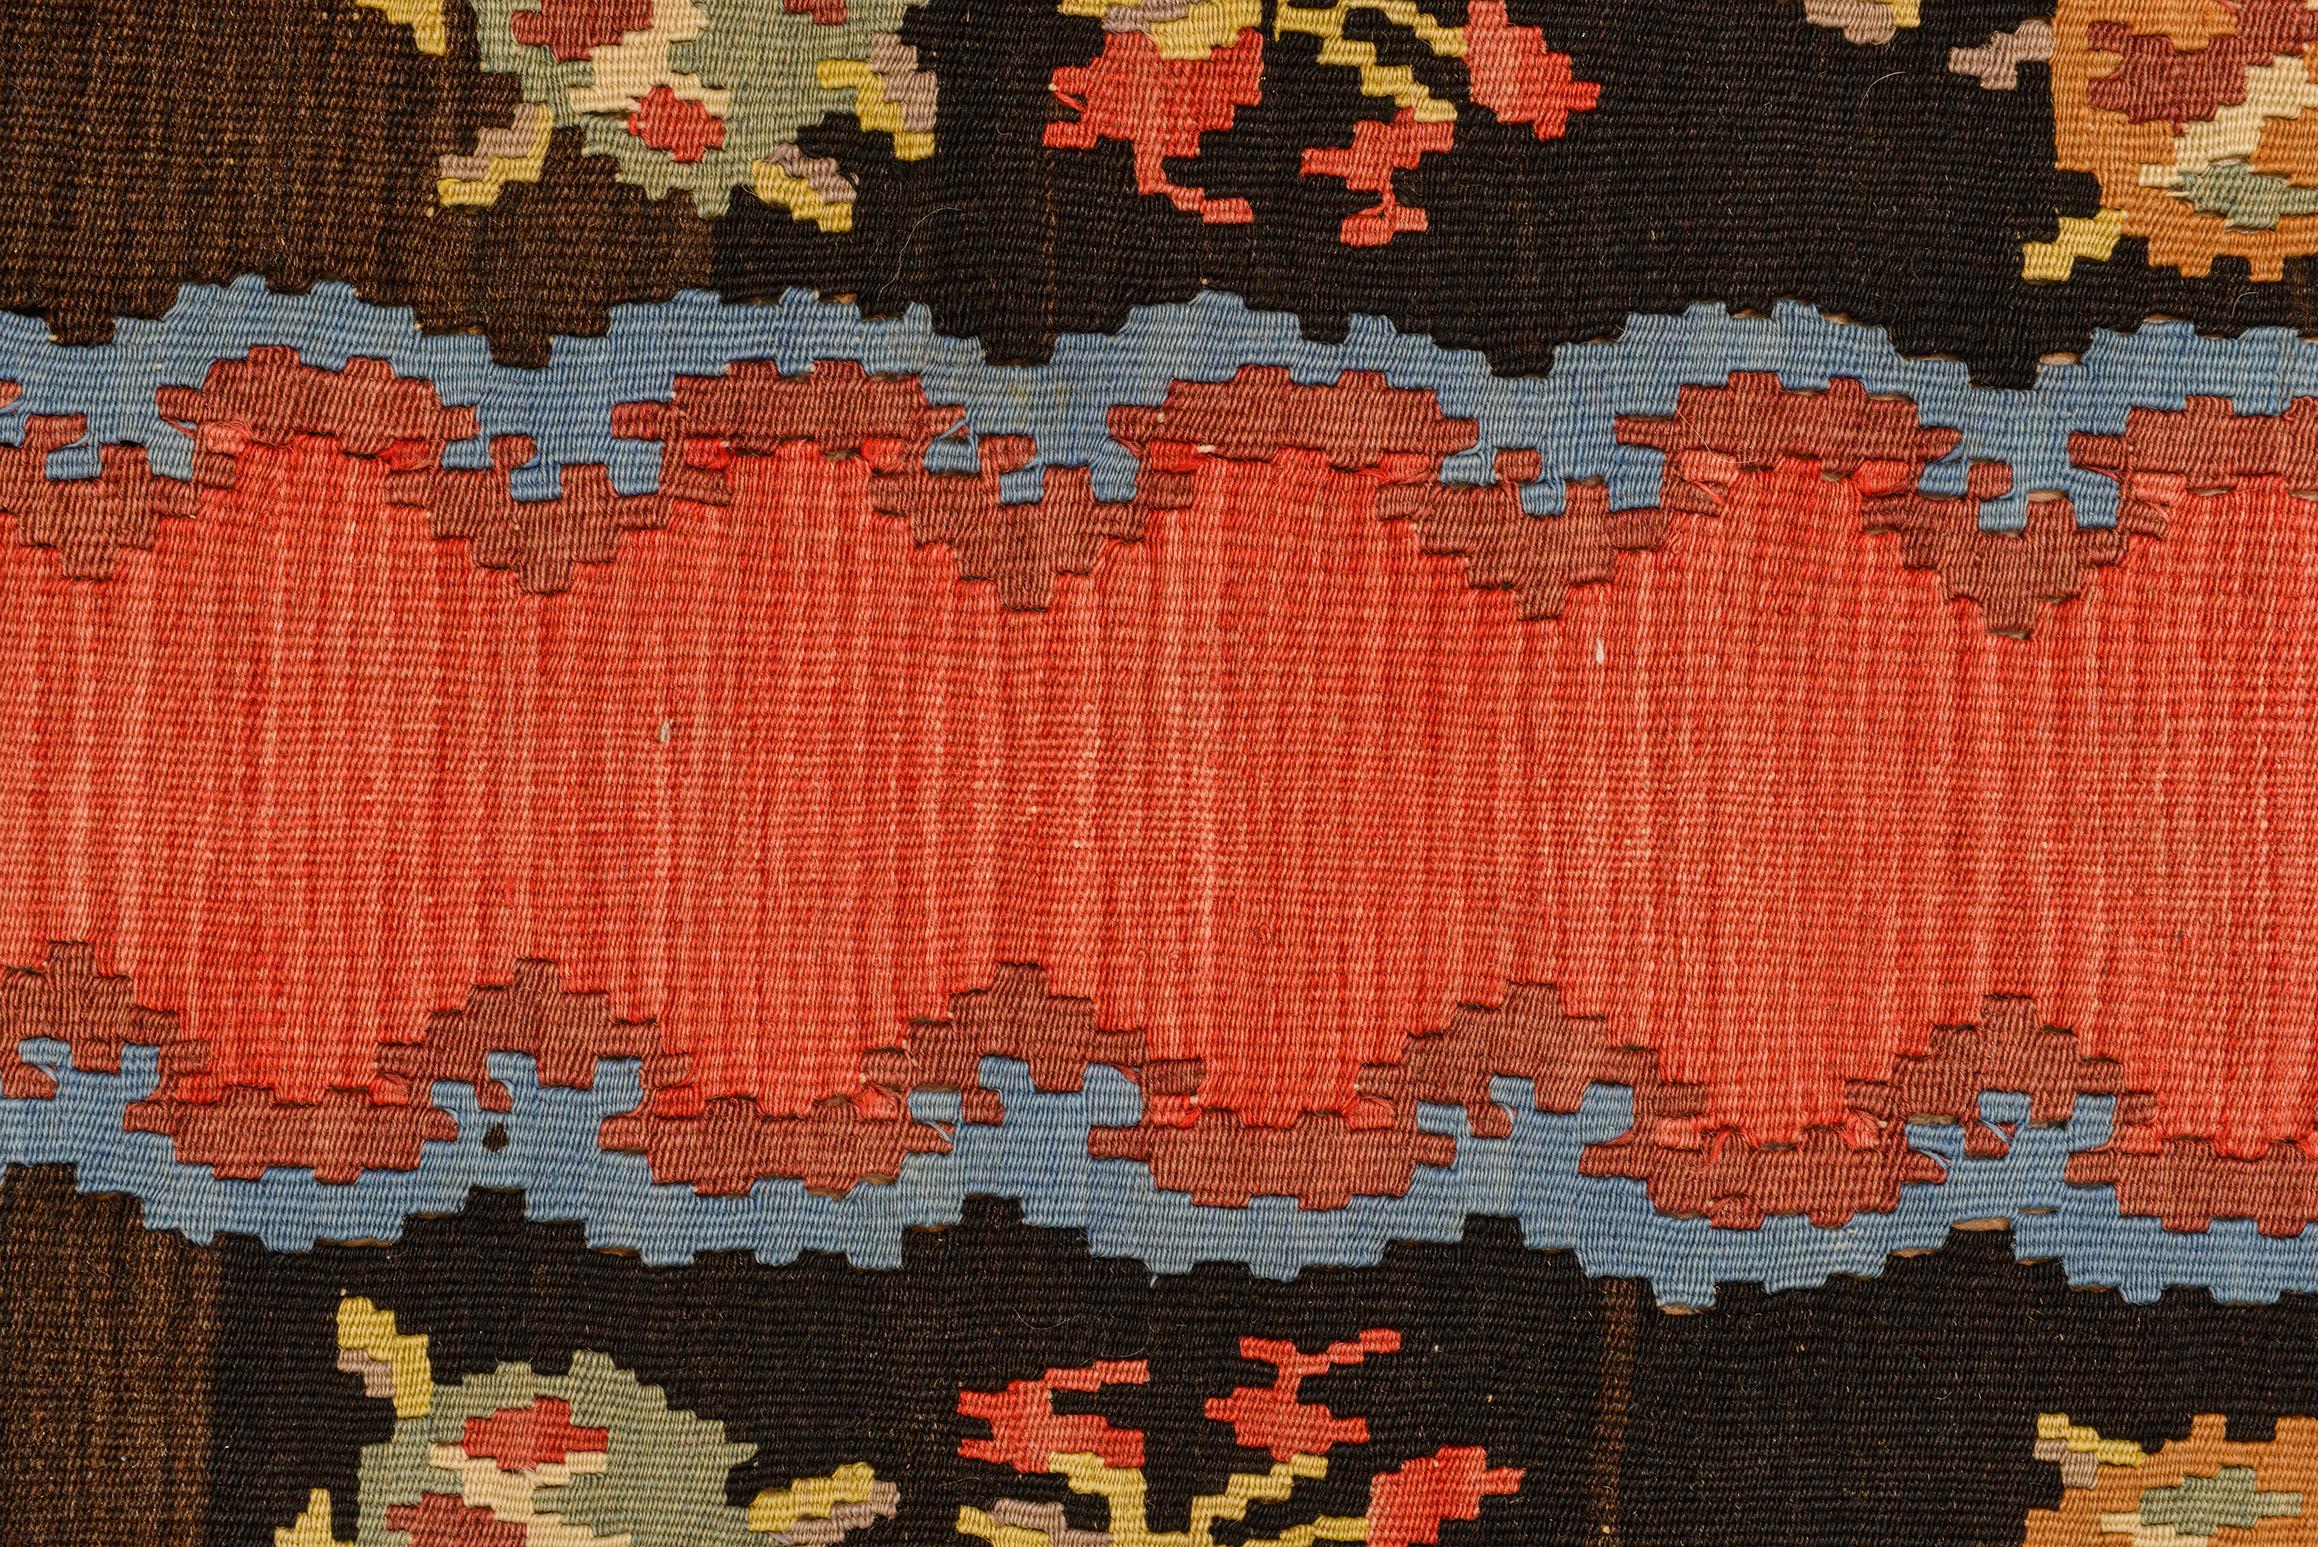  Old flat-wave Kilim runner, red center  with beautiful Bessarabian rose design in the border: simple and elegant.
Nr. 532.